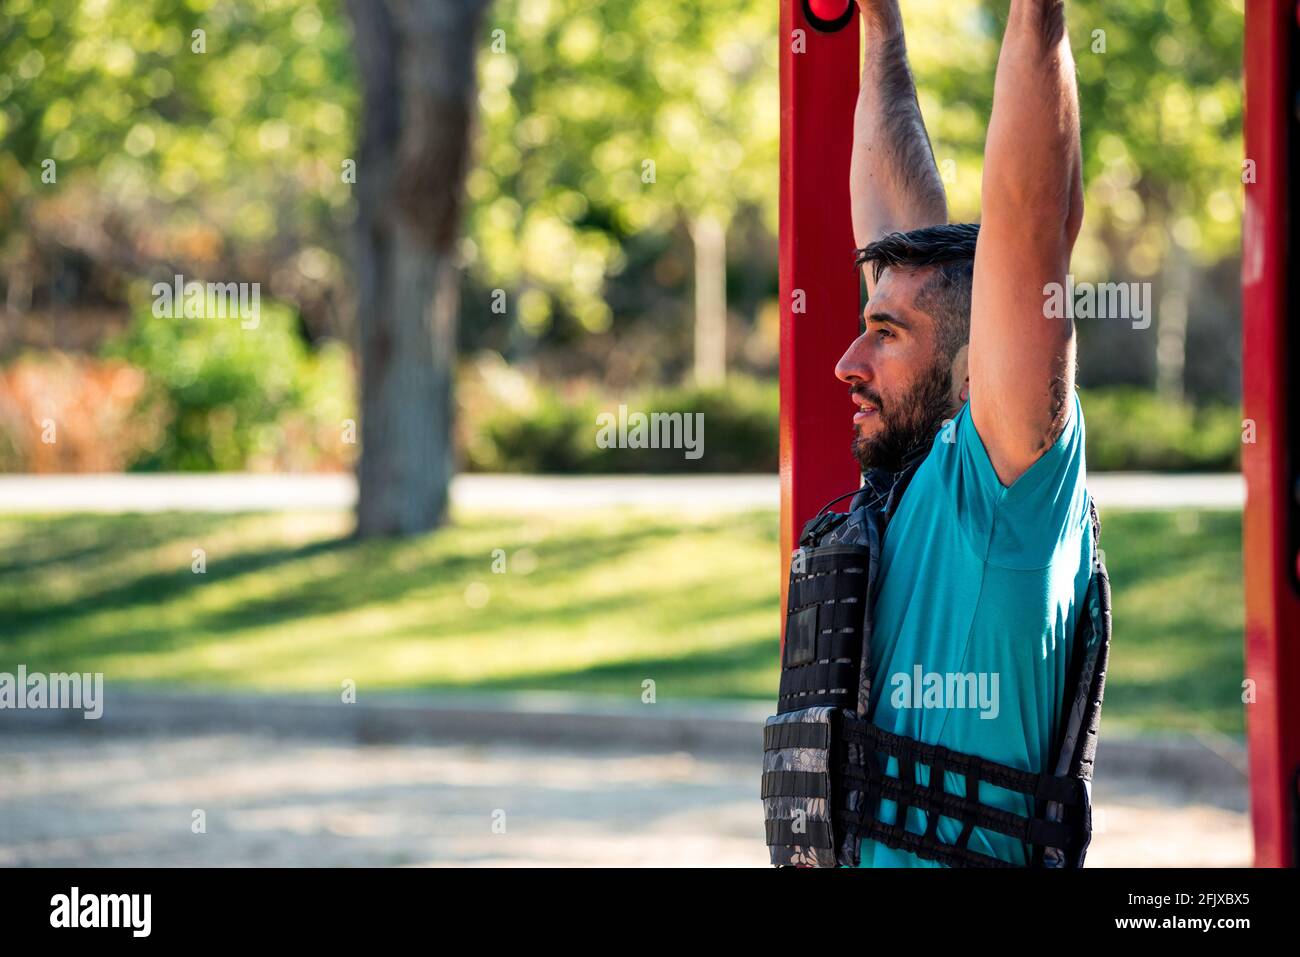 Bearded brunette man doing a barbell pull-up with weight vest. Outdoor fitness concept. Stock Photo